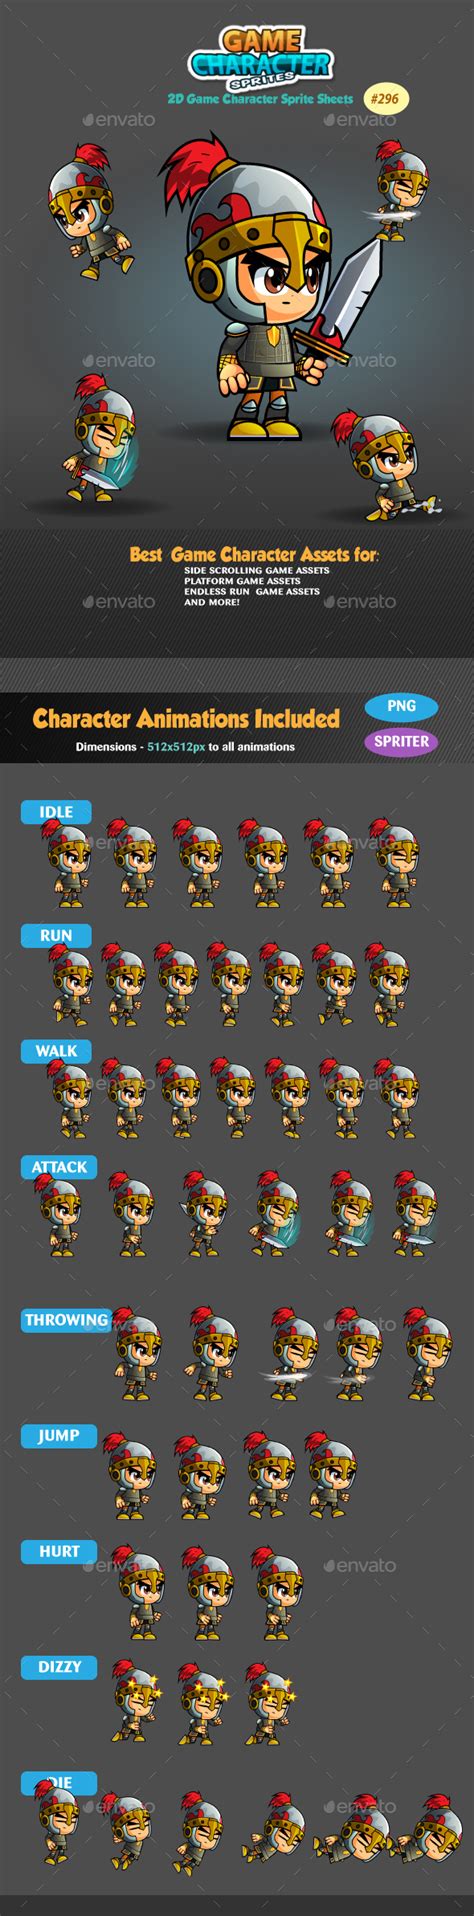 Knight 2d Game Character Sprites 296 By Pasilan Graphicriver